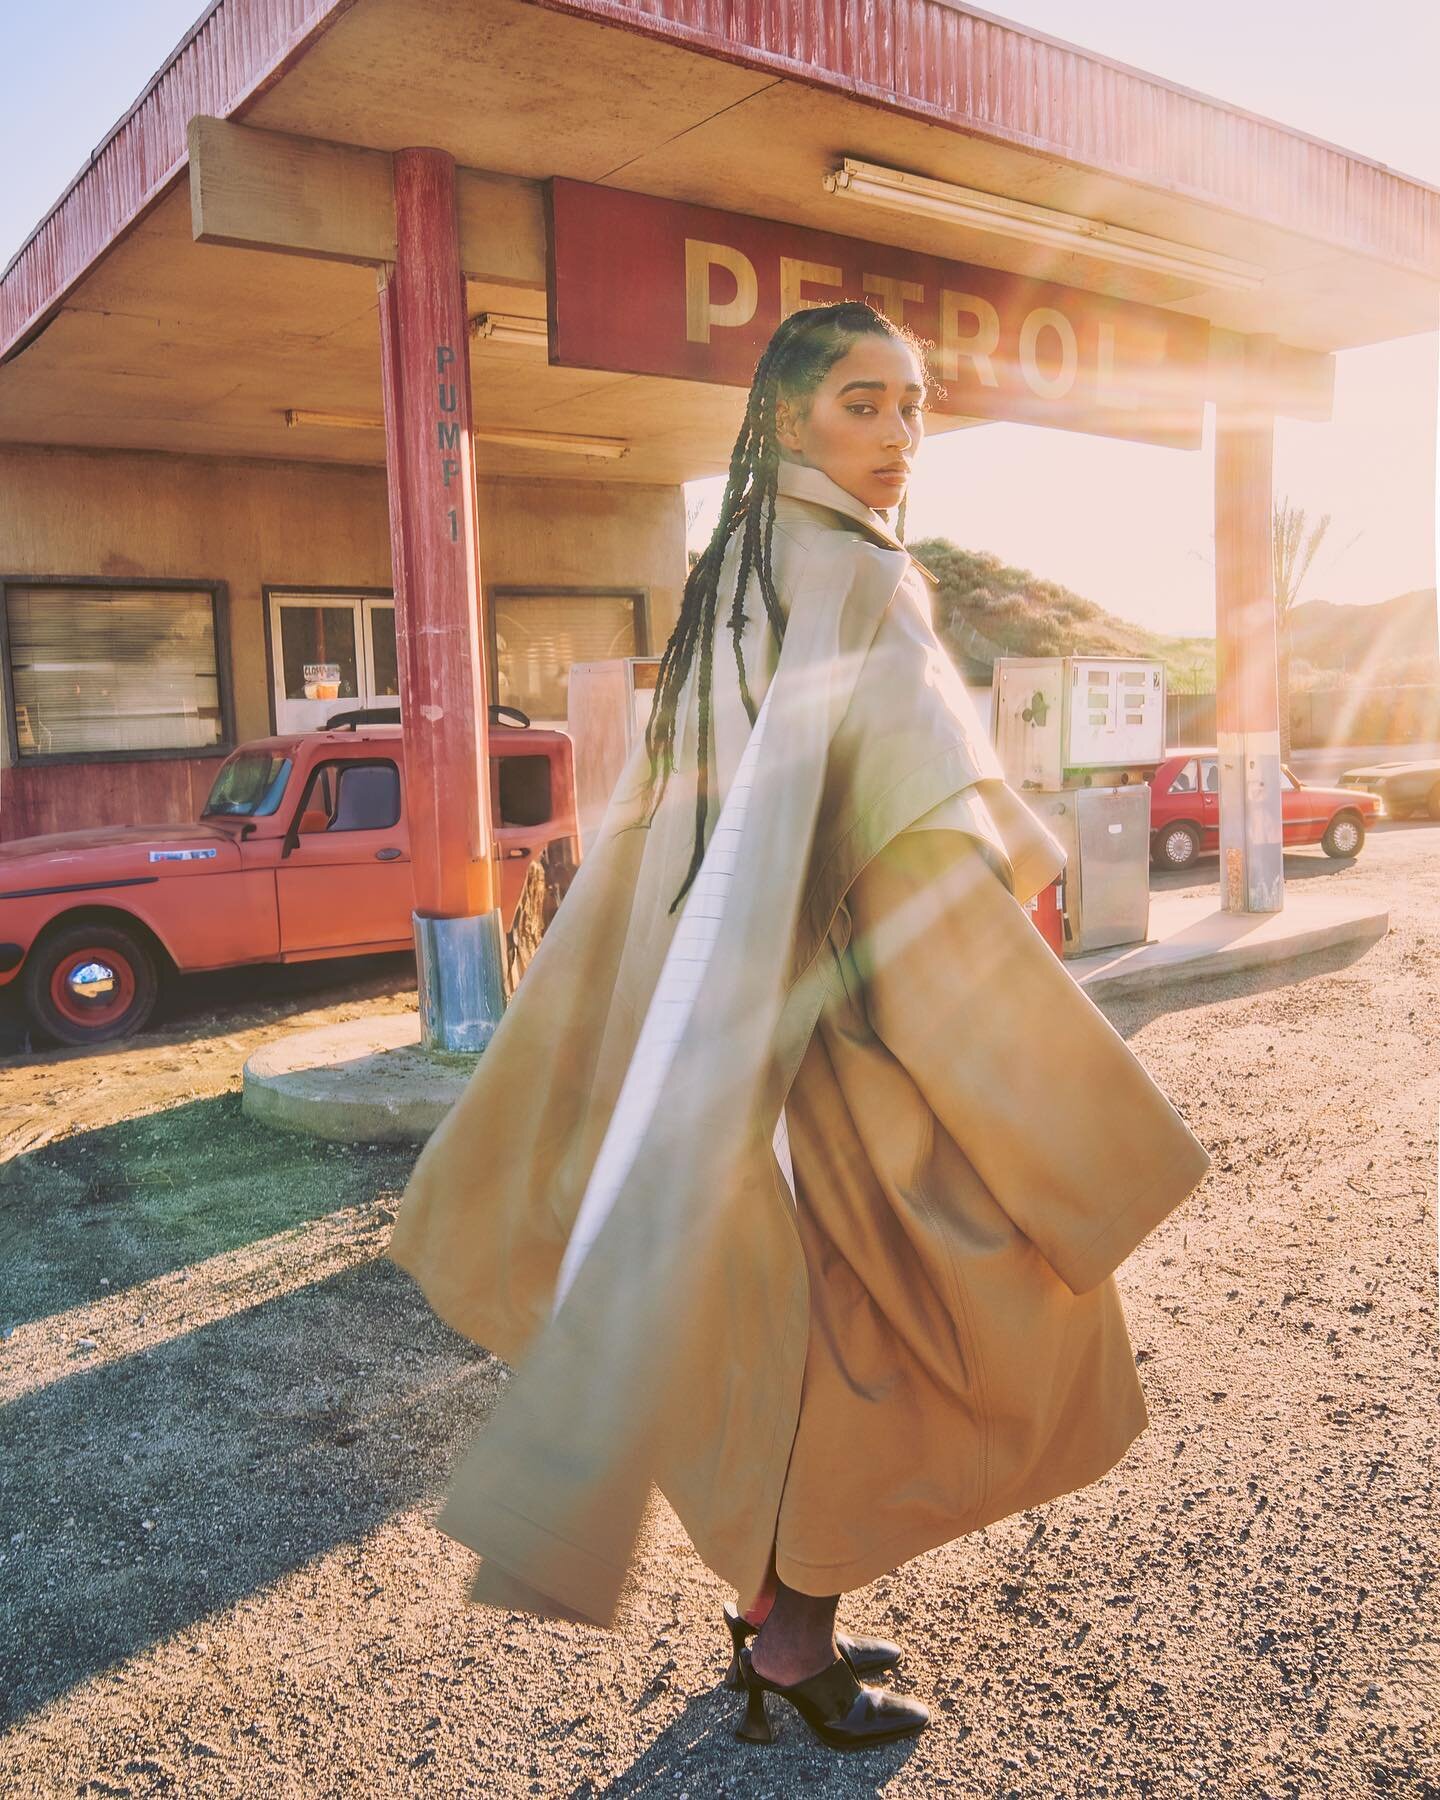 Excited to share the @ccaliforniastyle Spring Issue cover story with the beautiful @amandlastenberg 

PHOTOGRAPHY @guyaroch 
FASHION DIRECTION @christianstroble @opusbeauty 
MARKET EDITOR &amp; STYLIST ASSISTANT @gaiakhat 
CHIEF CREATIVE OFFICER @jam